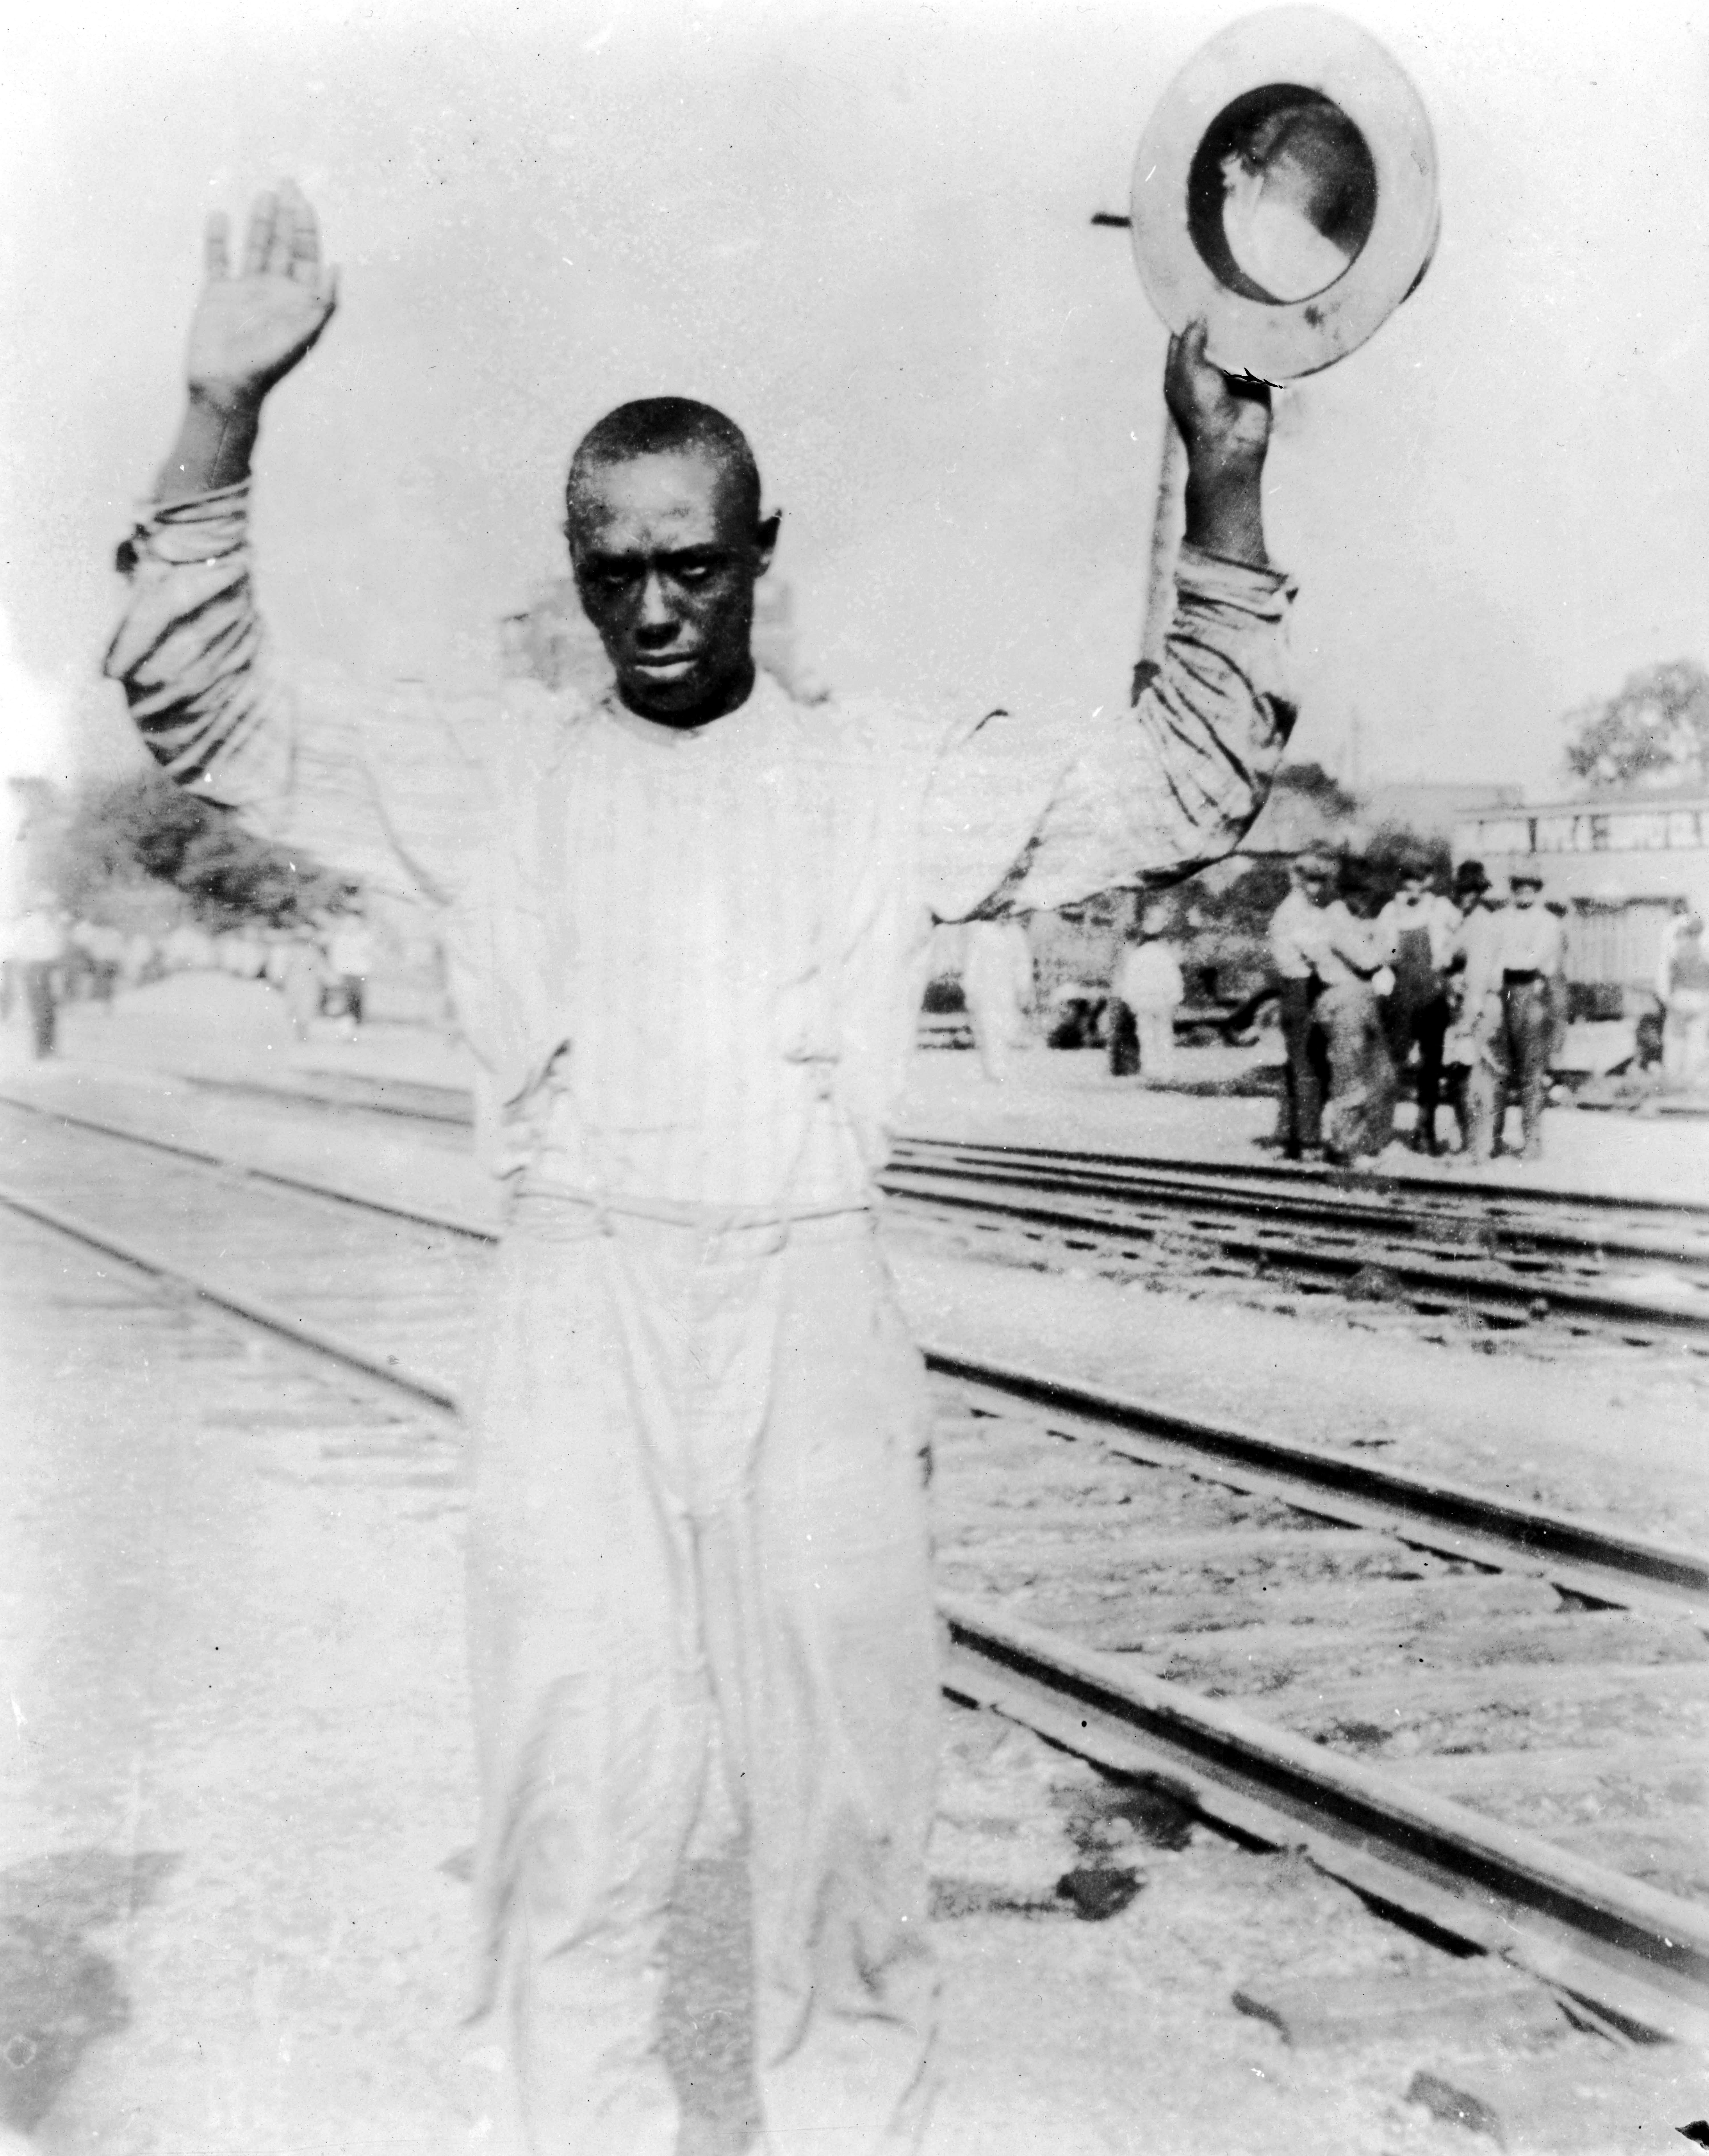 Photo of an African-American man being detained during the Tulsa Race Riot. The man is standing next to railroad tracks and is holding his hands in the air as if being arrested. Several white men watch from the other side of the tracks.